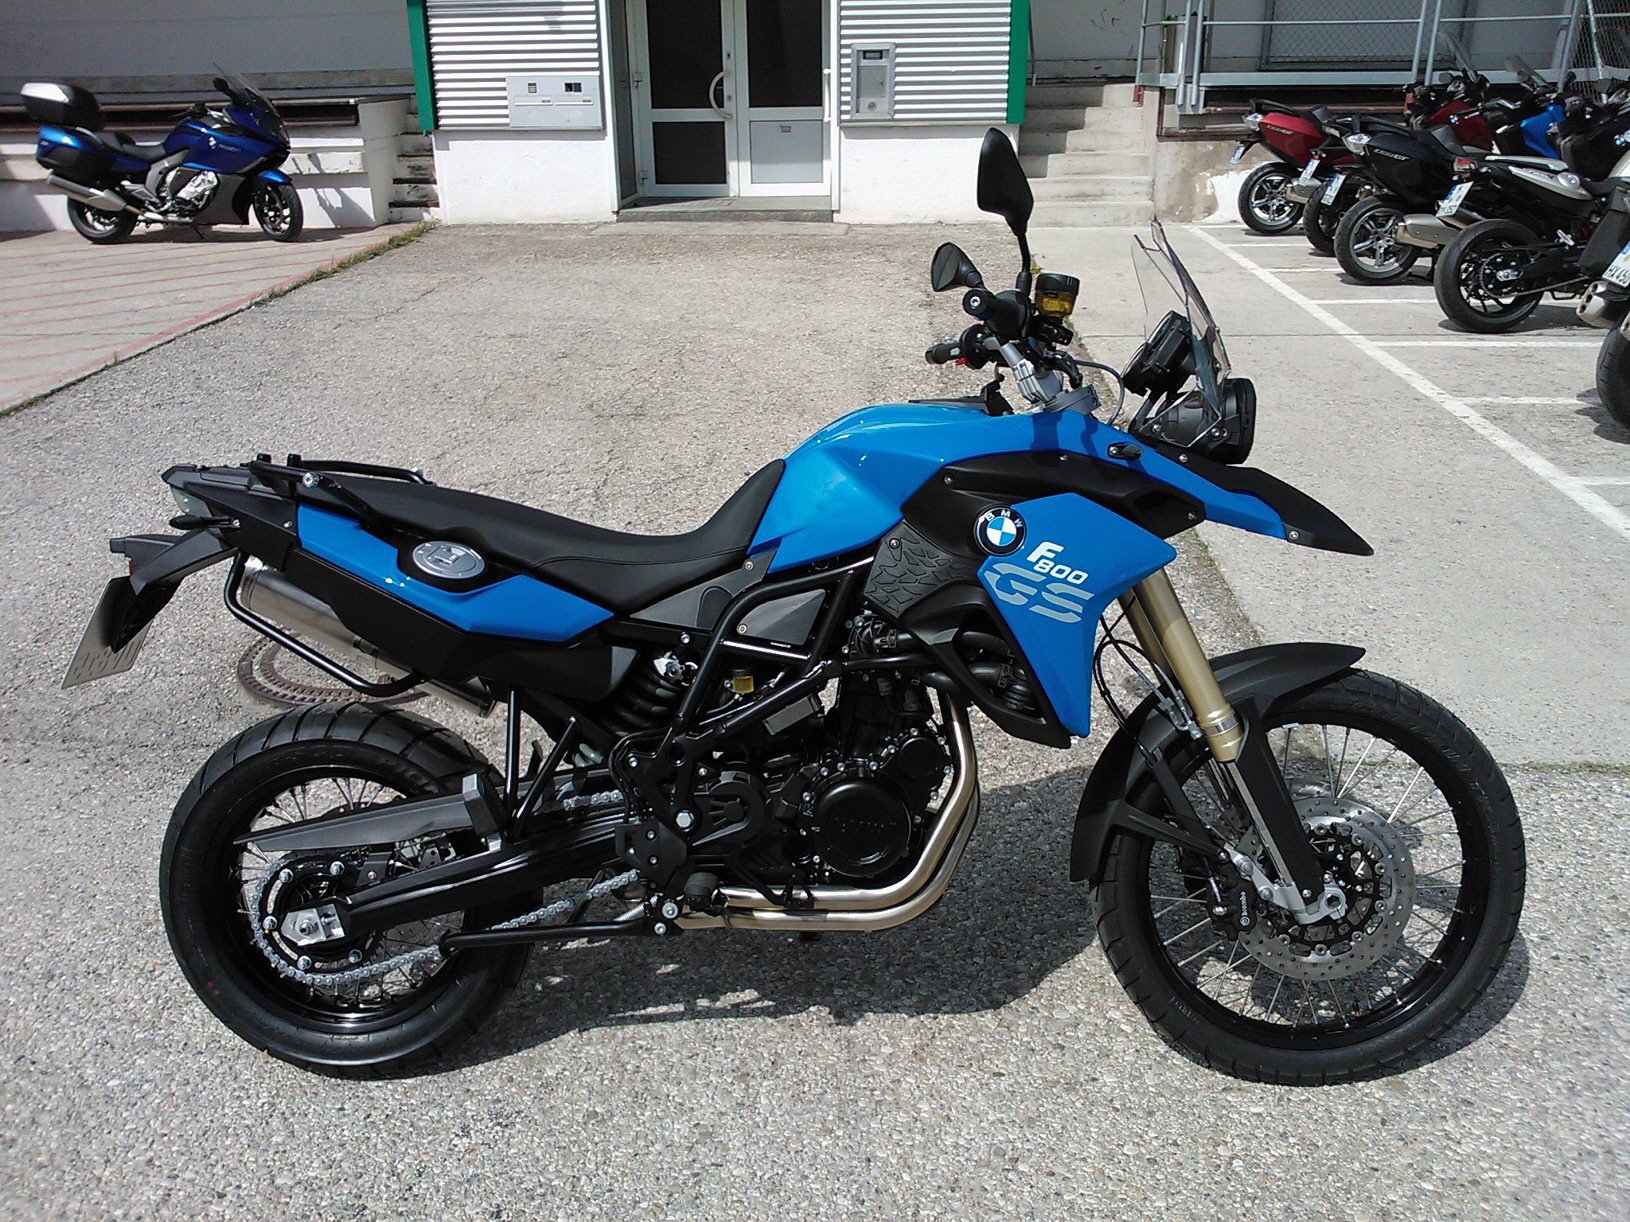 2013 BMW F700GS - Motorcycle Reviews, Specs and Prices